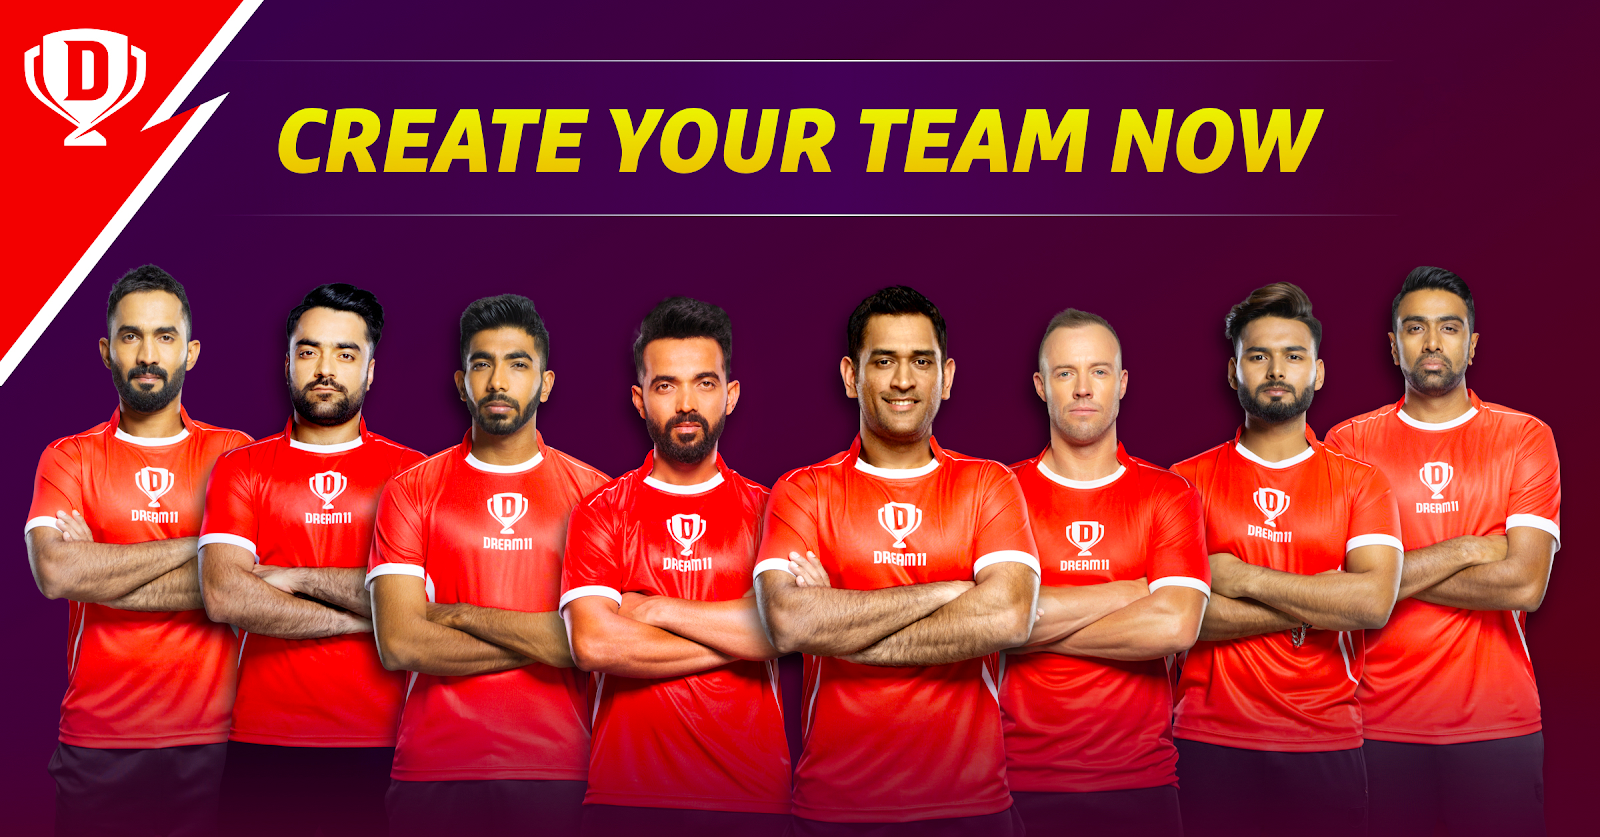 Dream11 signs-up with 7 IPL teams and 7 cricketers for its marketing campaigns